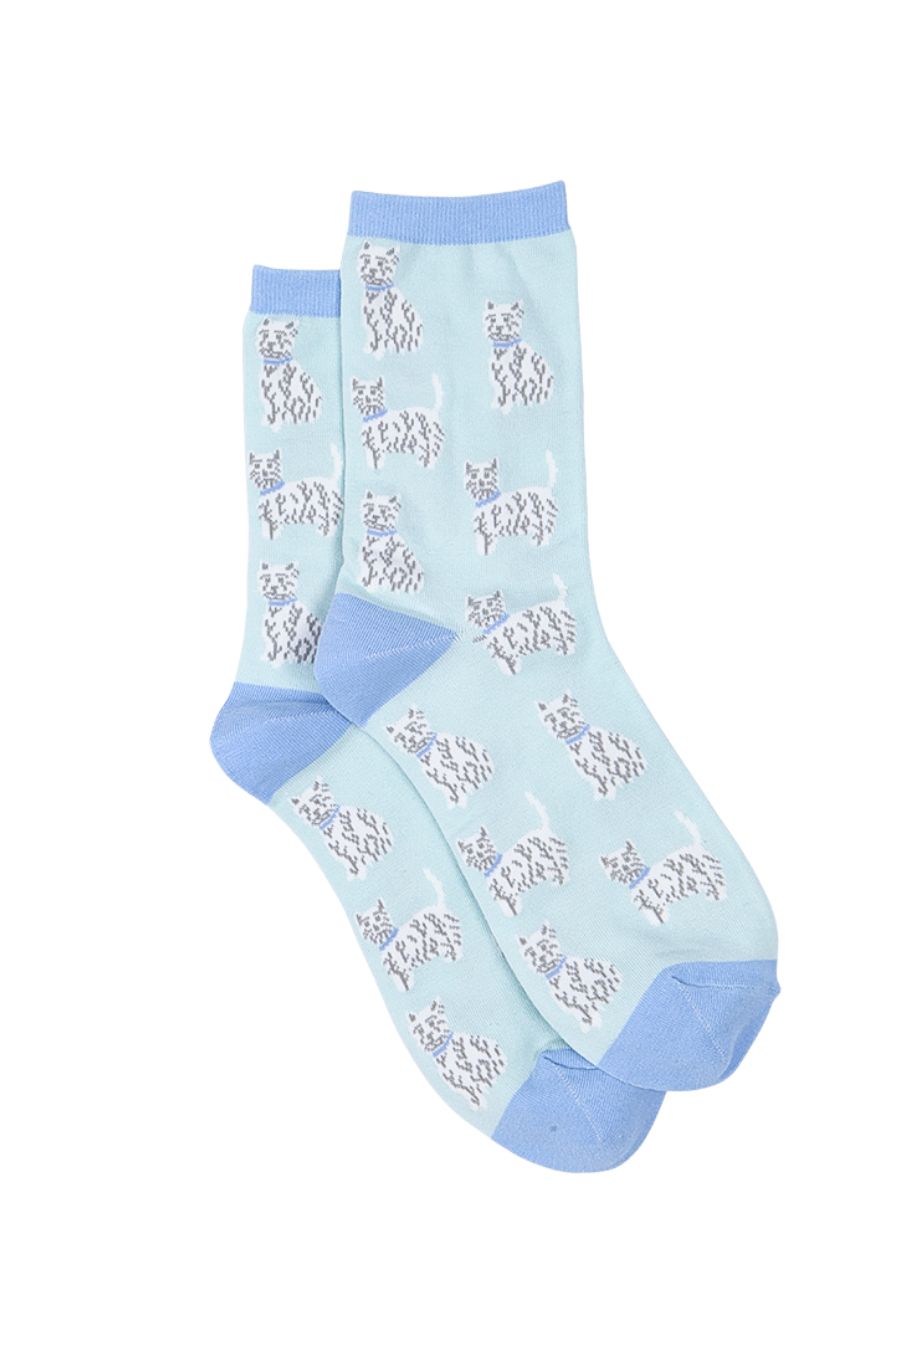 blue bamboo socks with west highland terriers